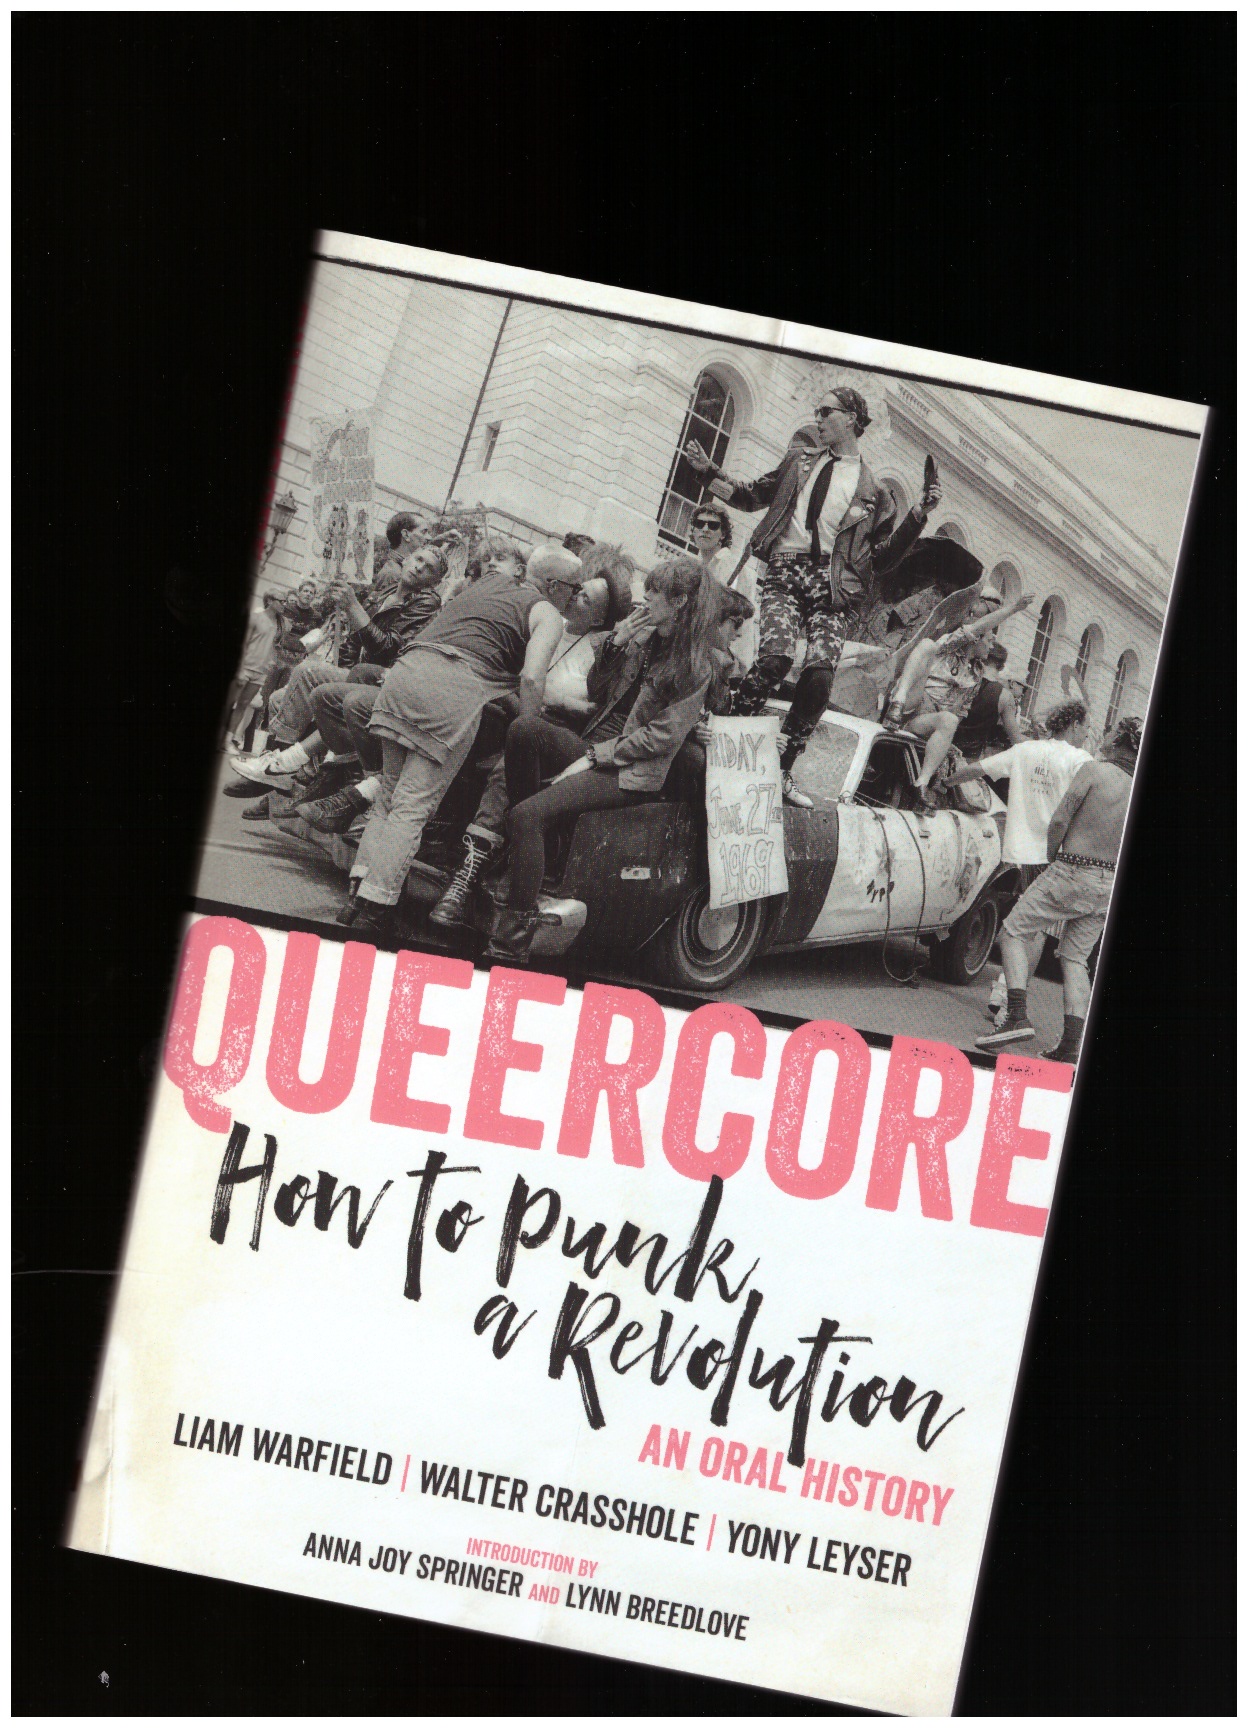 WARFIELD, Liam; Walter Crasshole; LEYSER, Yony (eds.) - Queercore. How to Punk a Revolution: An Oral History